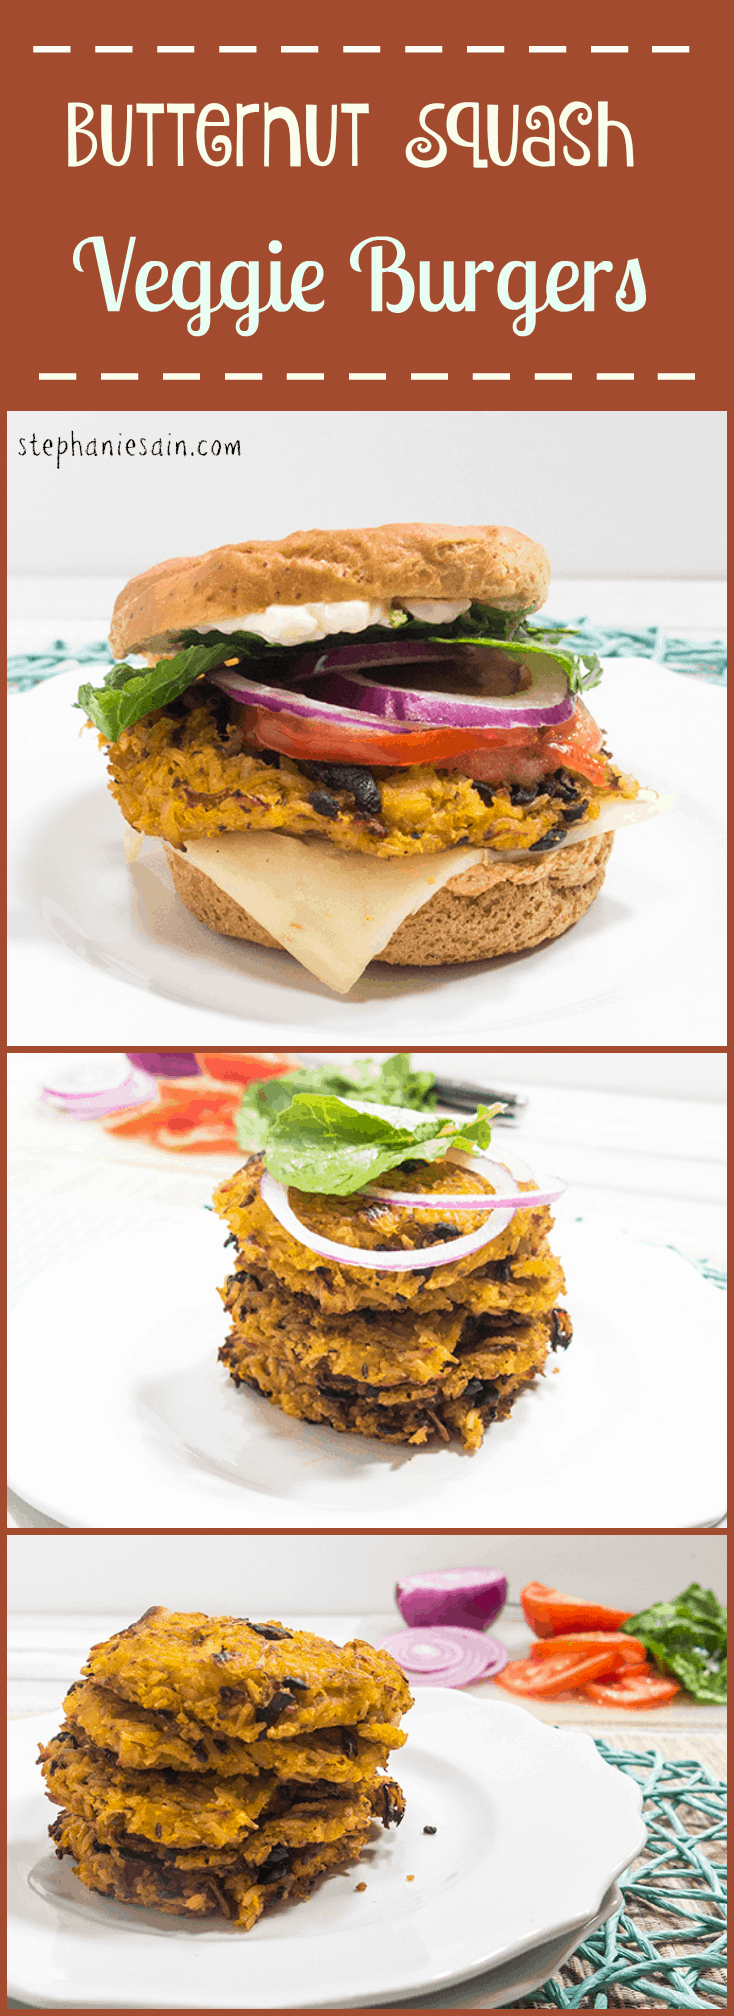 Butternut Squash Veggie Burgers are a tasty, healthy, vegan and gluten free burger. Great with all your favorite burger toppings.